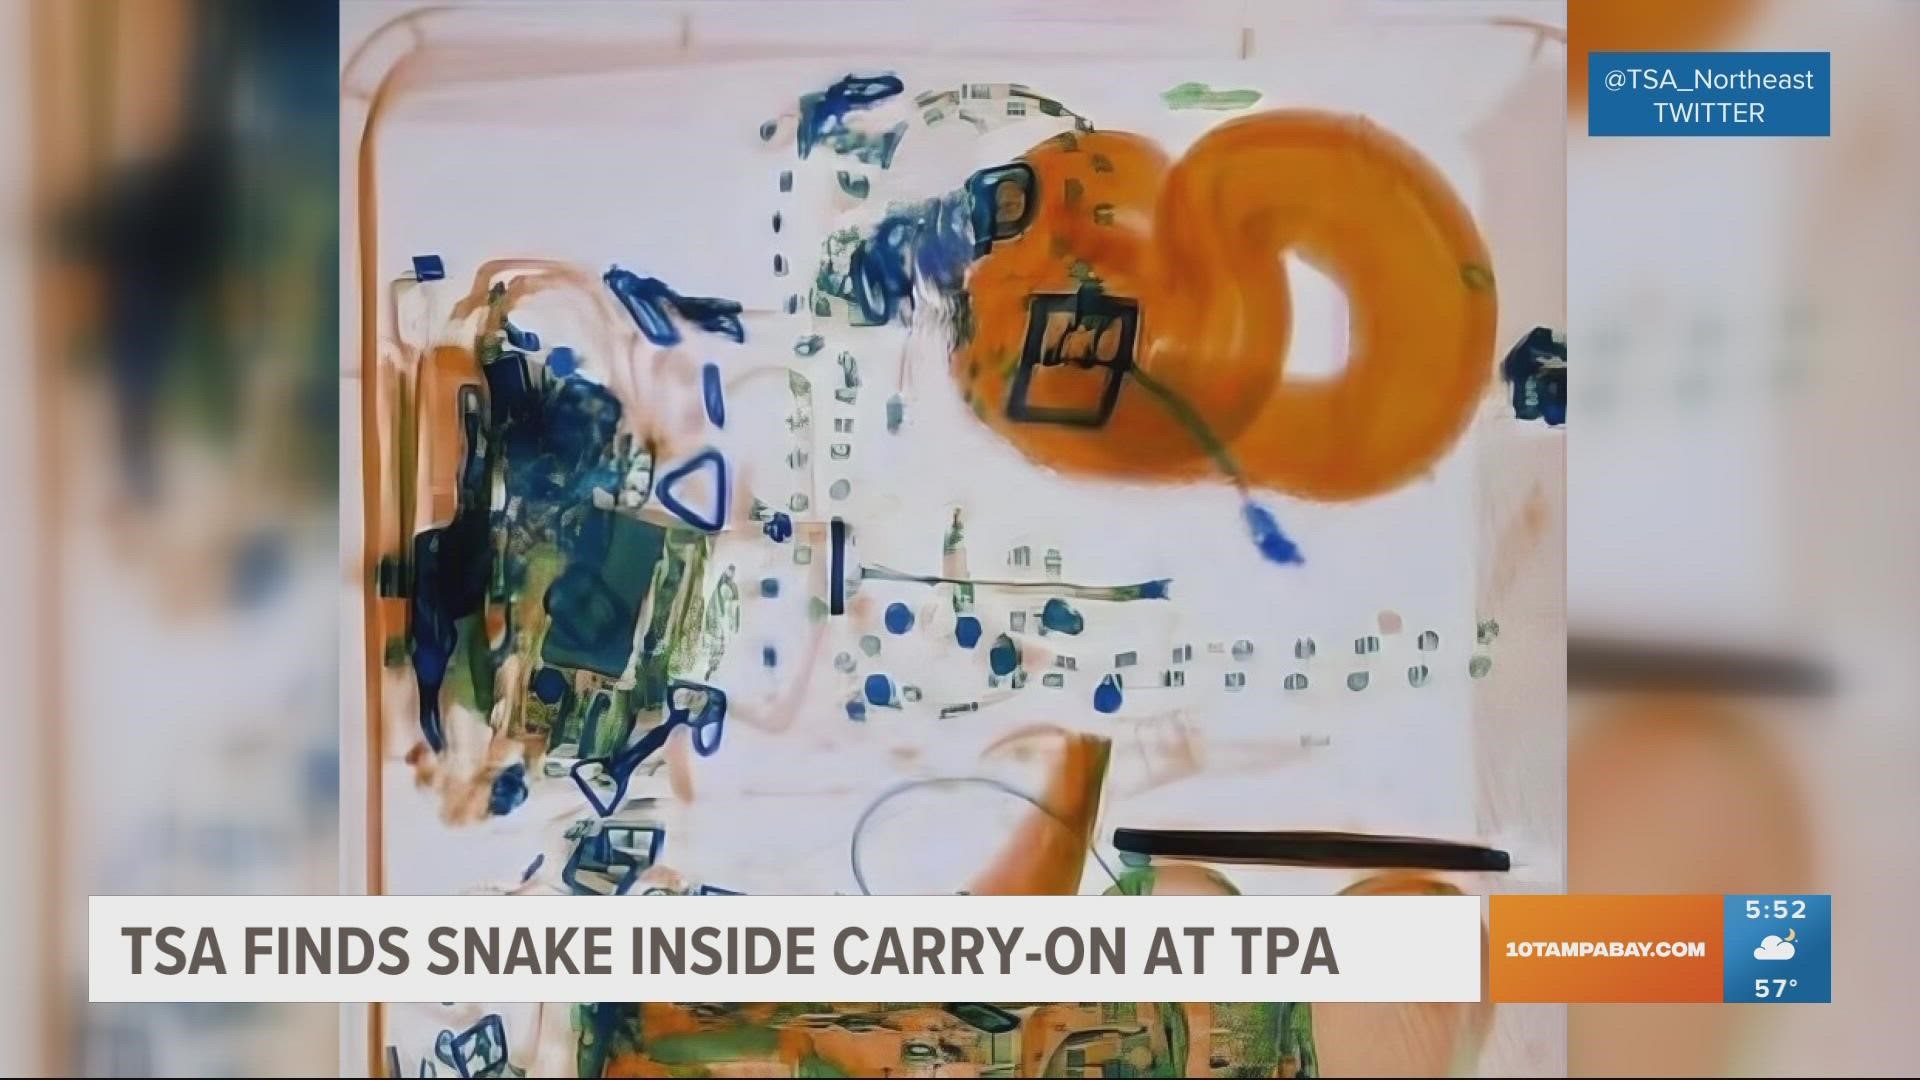 According to TSA, the woman claimed the 4-foot snake was her emotional support animal.